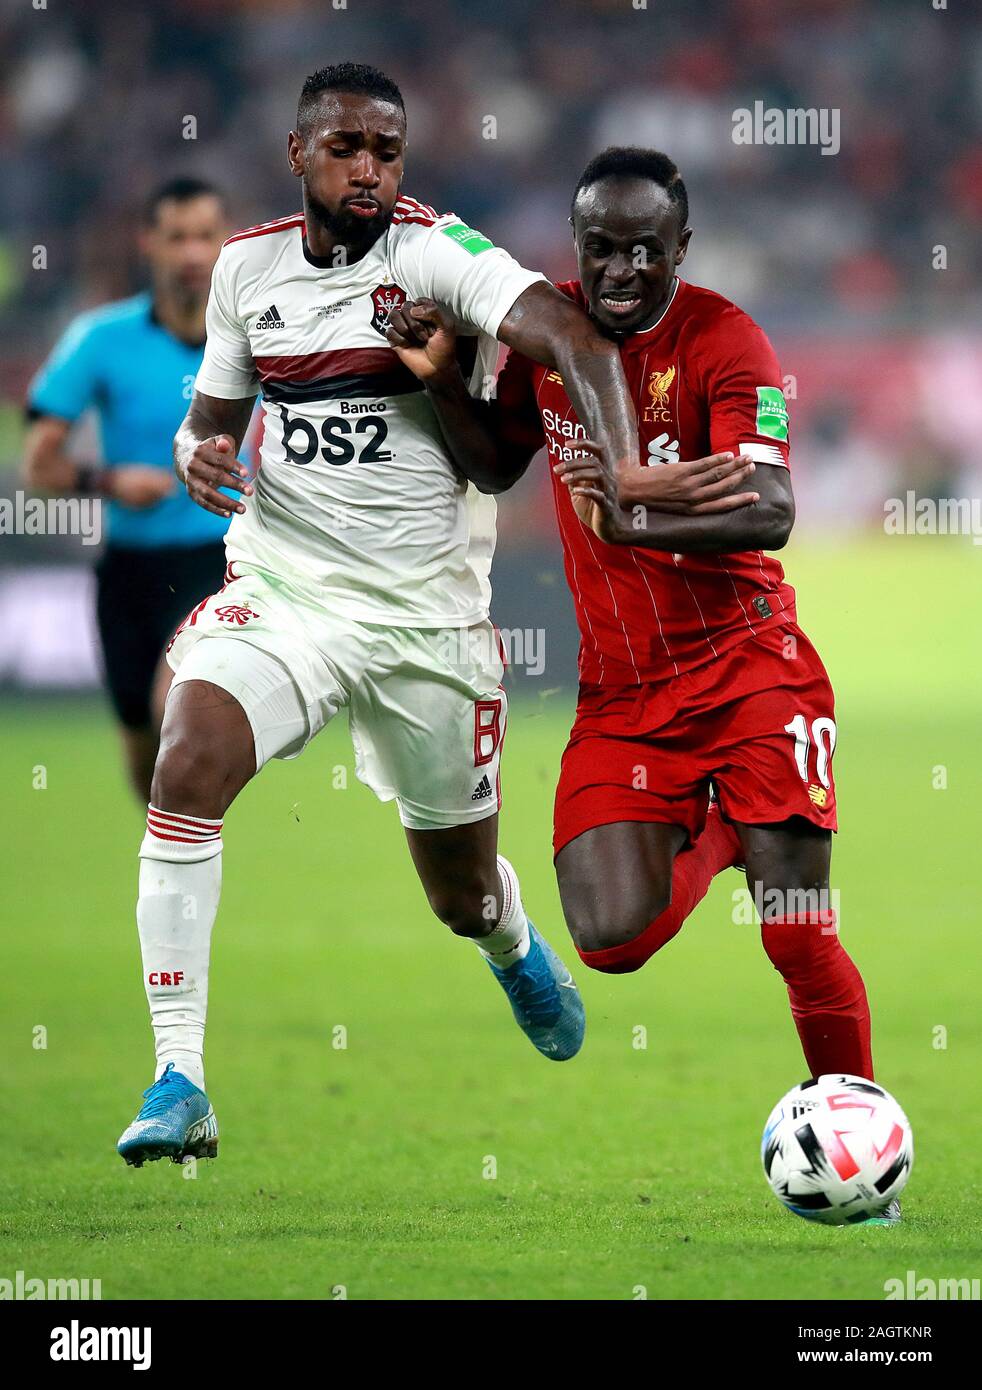 Flamengo's Gerson (left) and Liverpool's Sadio Mane (right) battle for the ball during the FIFA Club World Cup final at the Khalifa International Stadium, Doha. Stock Photo